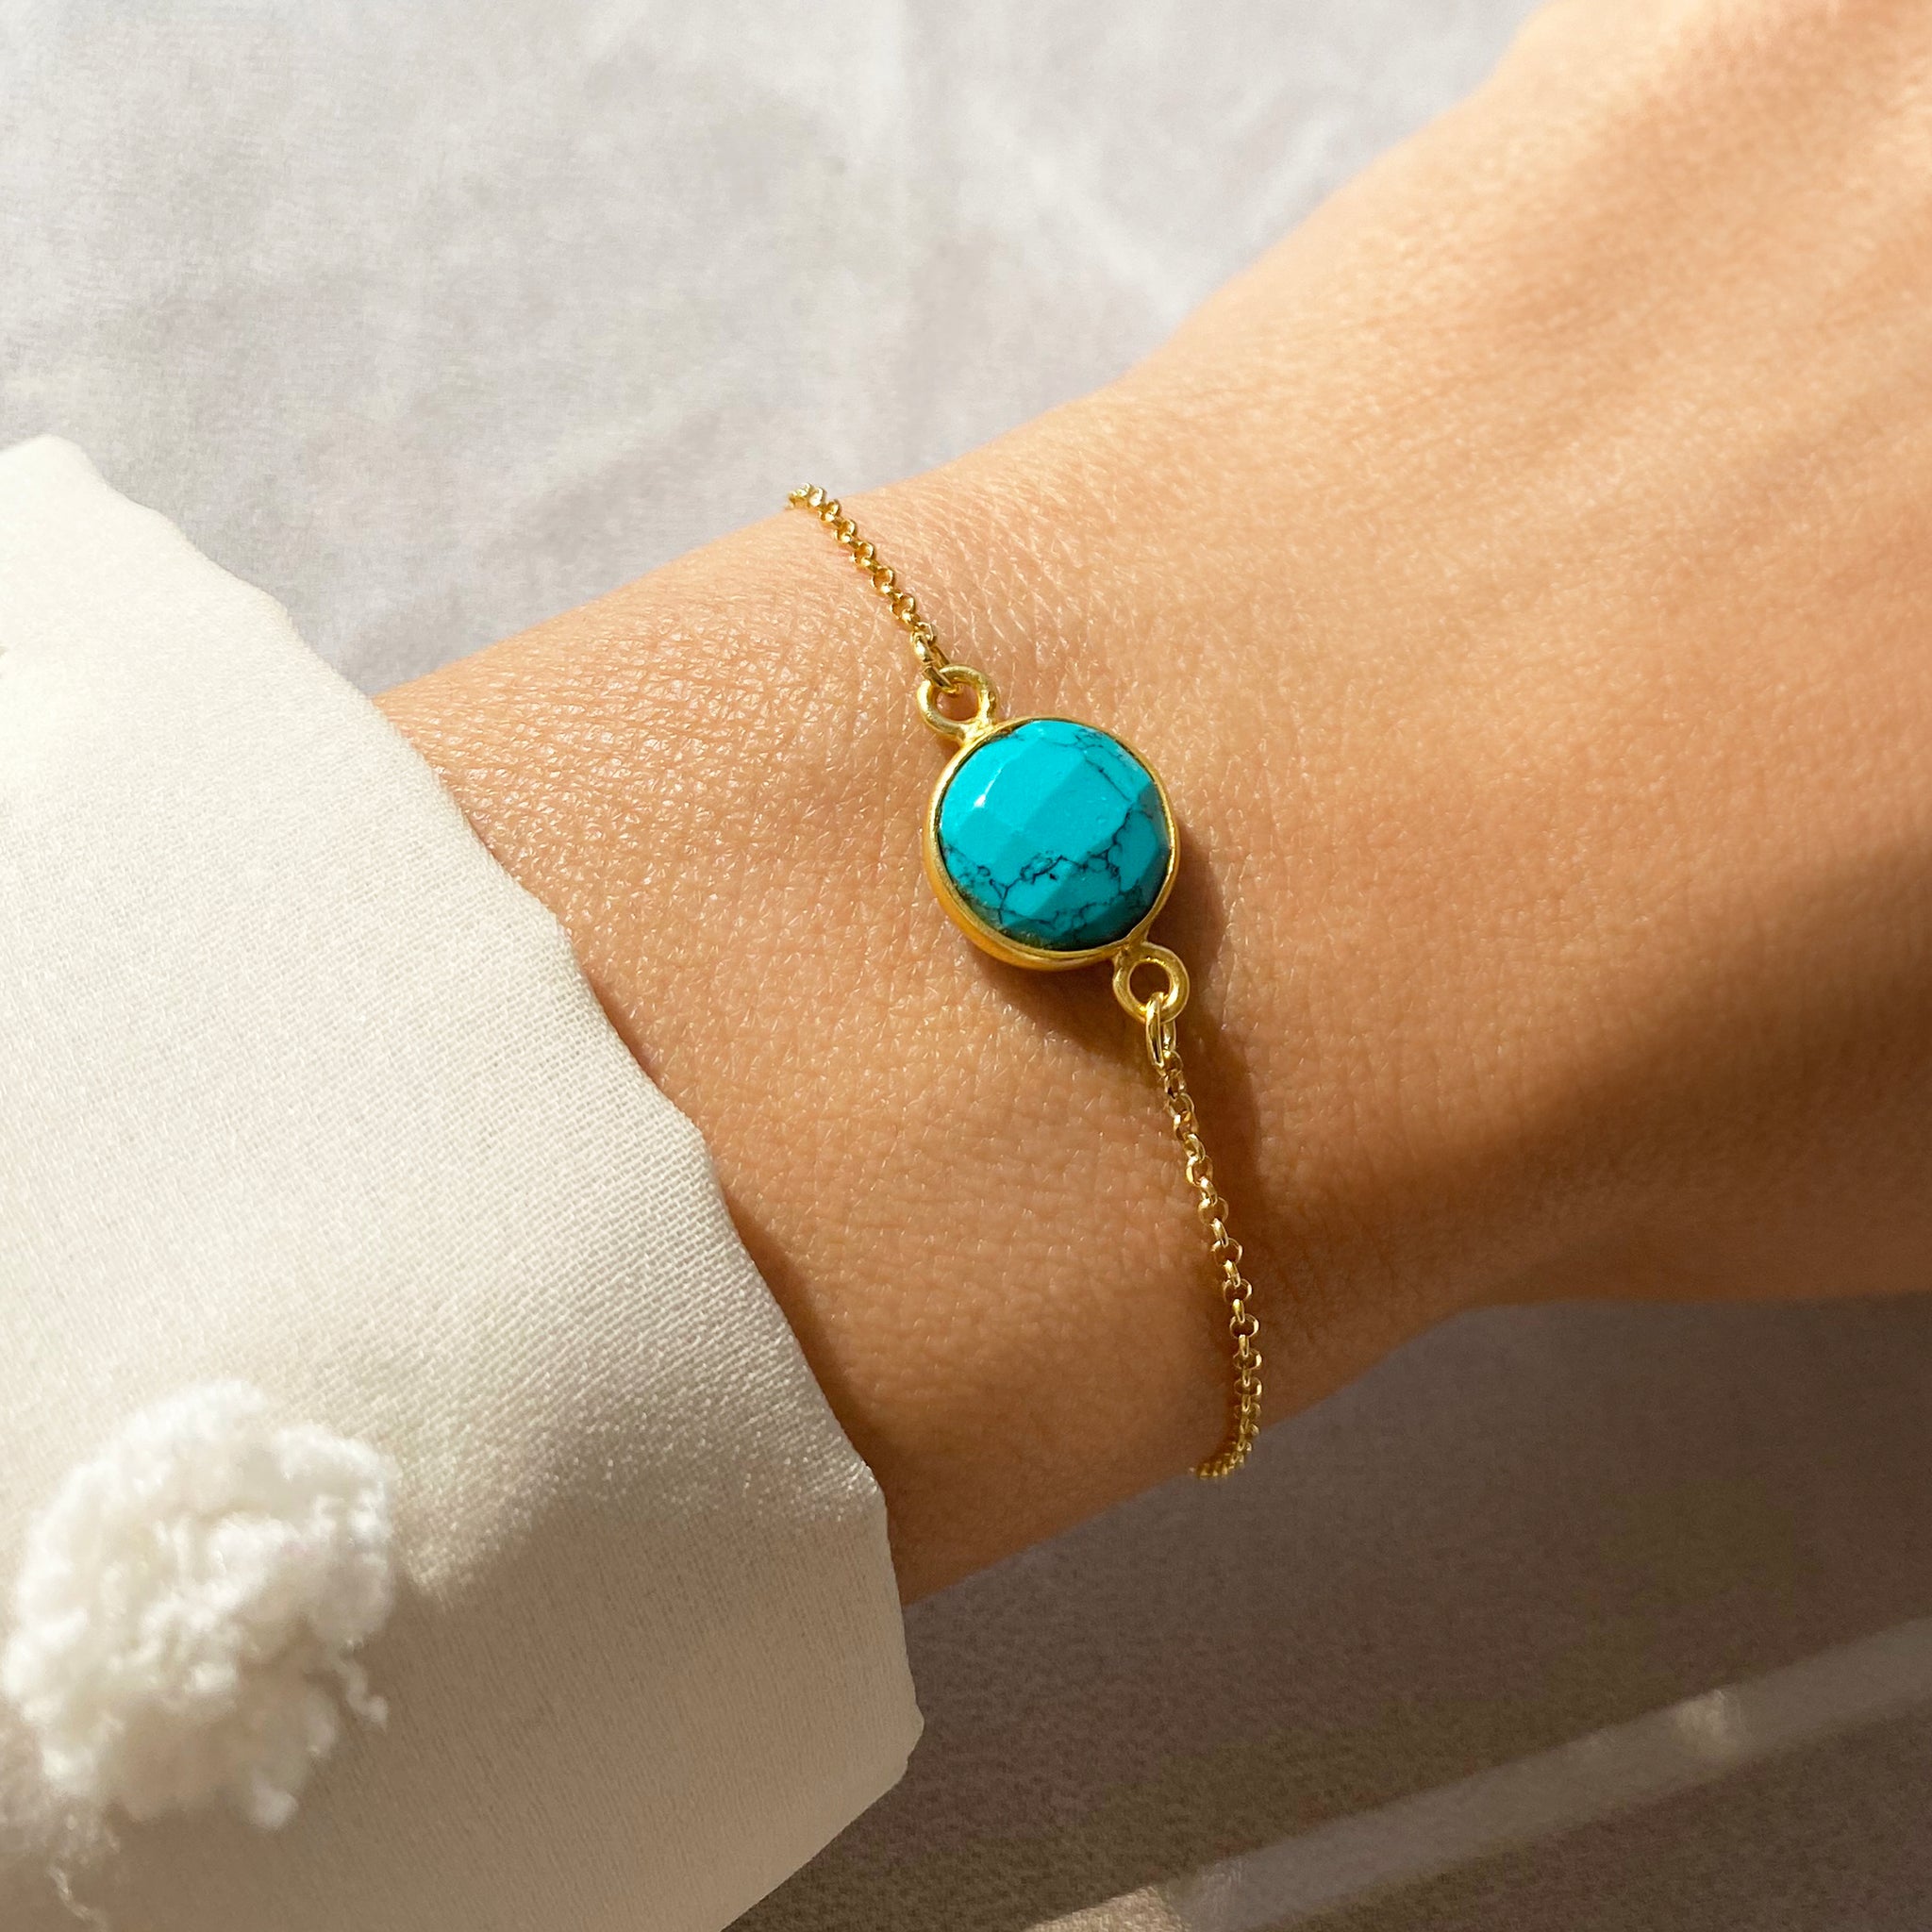 December birthstone Bracelet with a Turquoise crystal